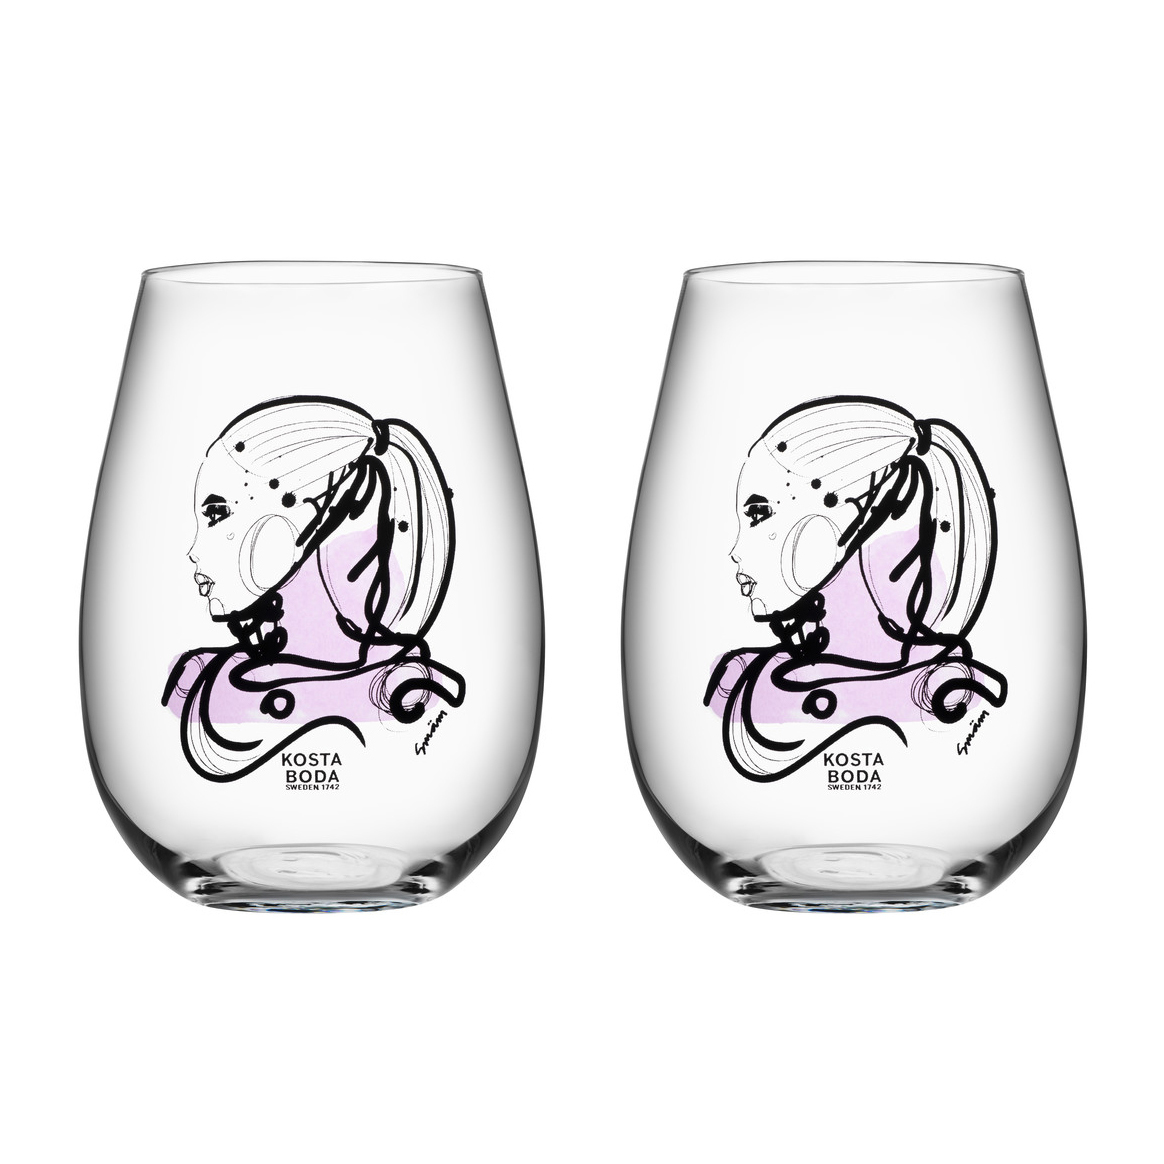 All about you glas 57 cl 2 fra Kosta Boda